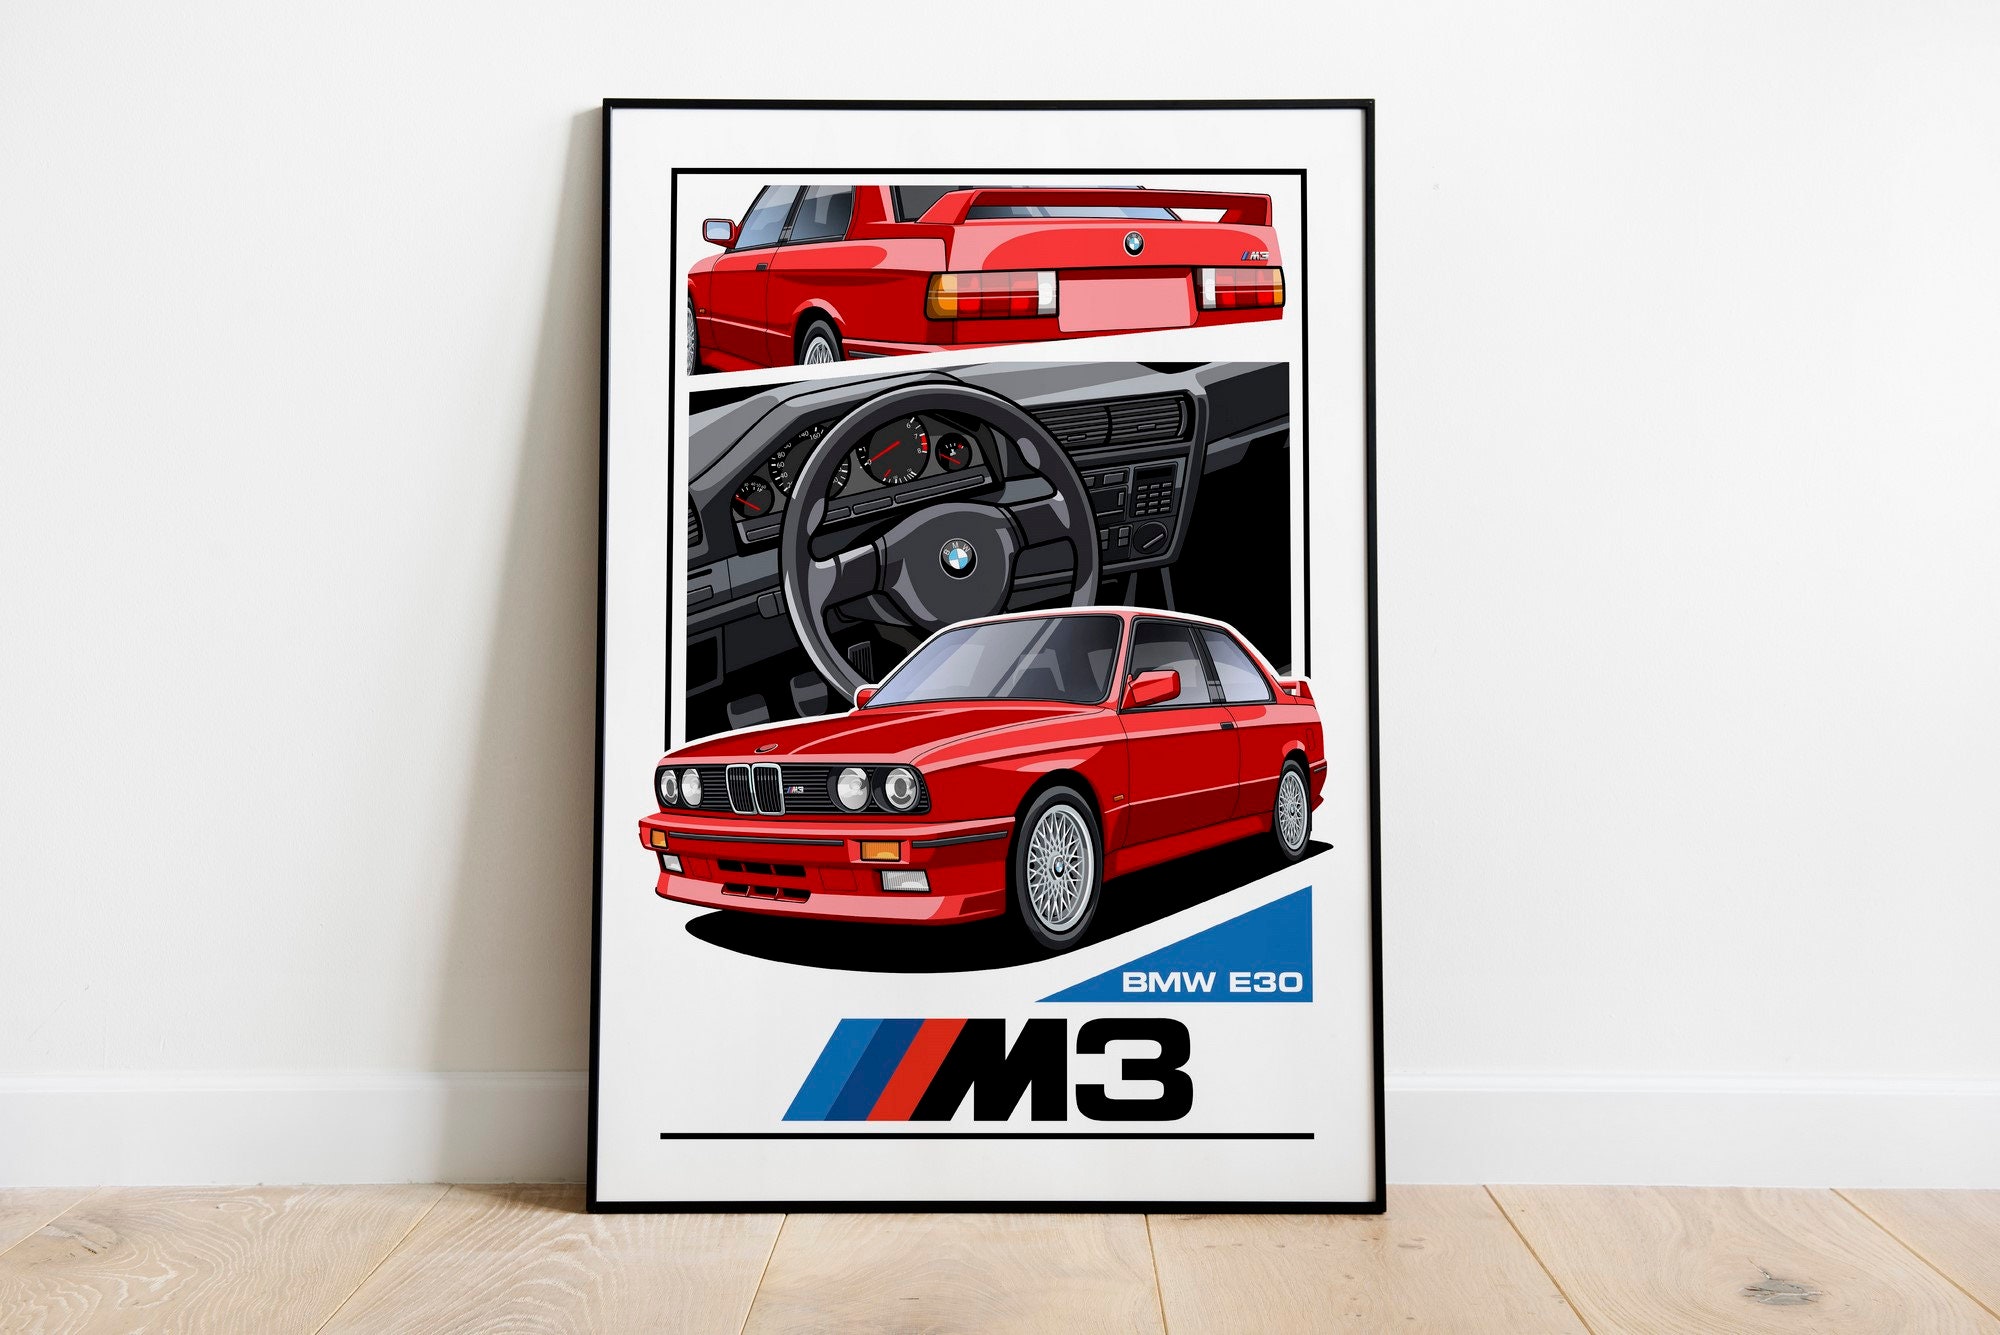 BMW E30 M3 BMW believes life begins at 6000 RPM´s poster